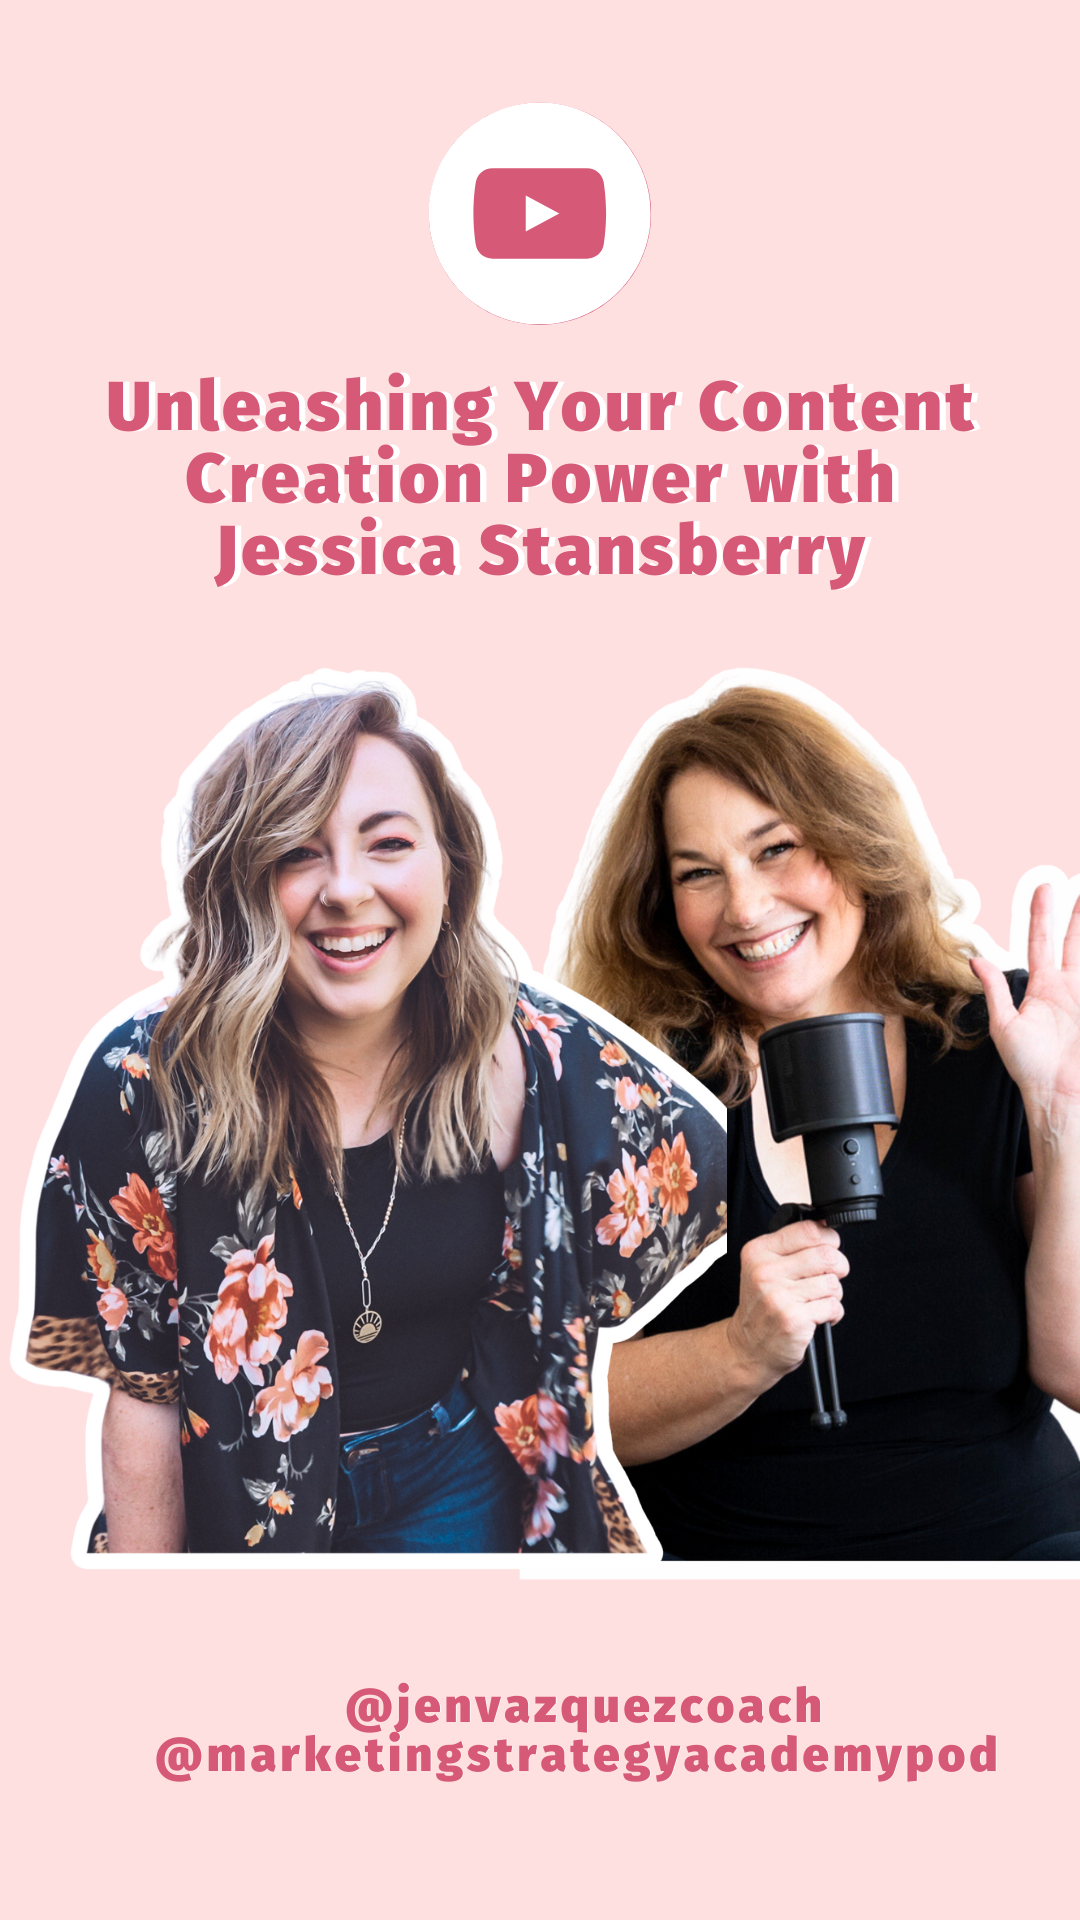 Unleash your content creation power with Jessica Stansberry! Discover her inspiring journey, YouTube growth strategies, and tips on balancing business and content creation in this must-read blog.